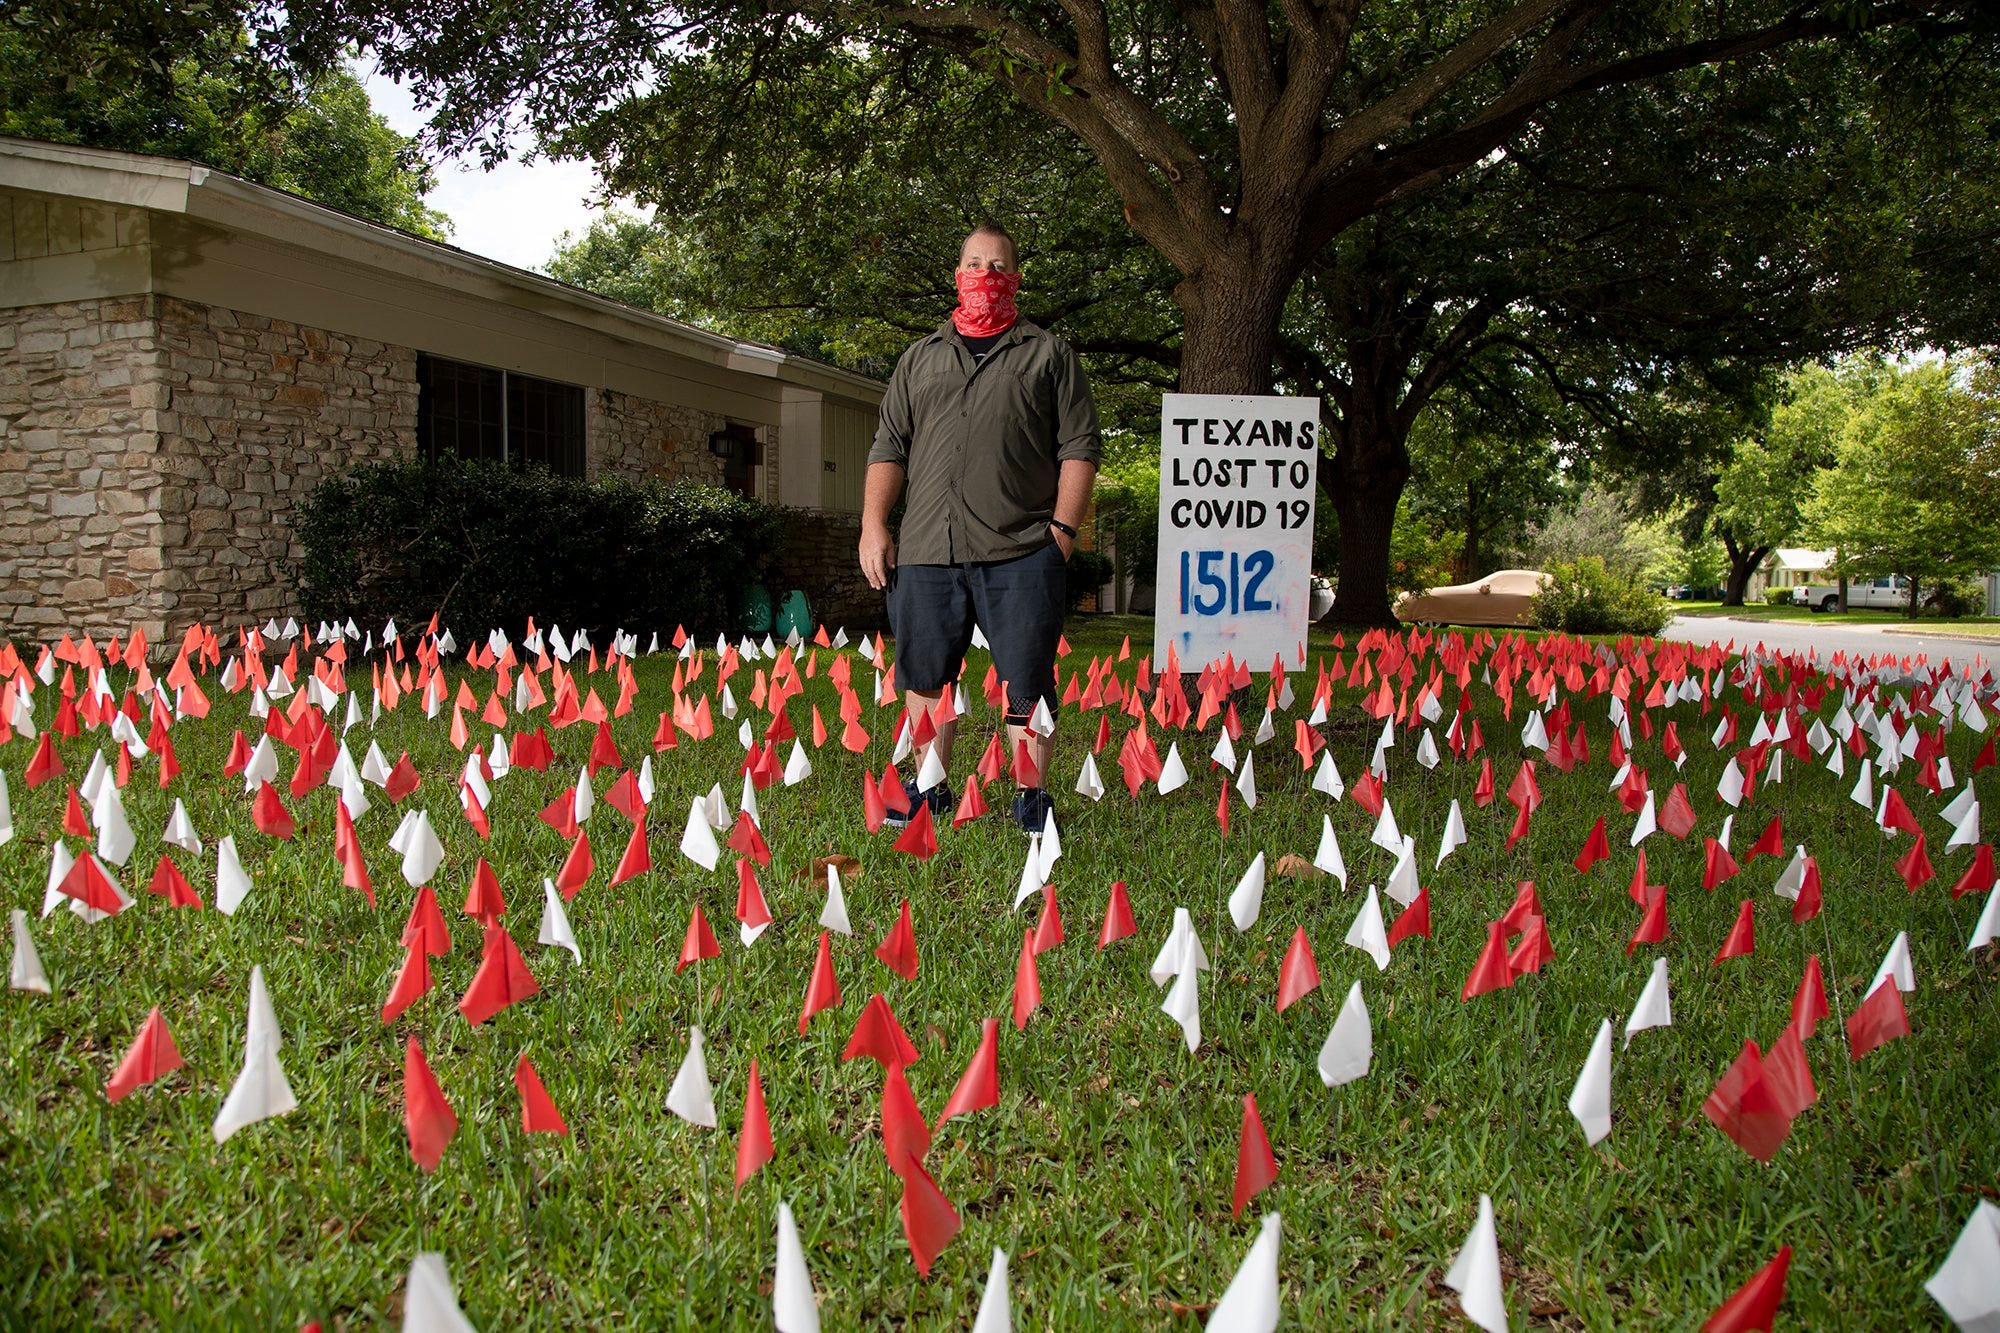 Austin artist Shane Reilly, 42, puts plastic flags in his yard to reflect the number of coronavirus deaths in Texas.  "I just felt that I had to say something so this was my way of reminding the public that there are real people dying," Reilly said. He continues to add flags every few days to keep up with the current number of state deaths. The current number of Texas fatalities as of May 26, 2020, is 1,527 according to the Texas Department of State Health Services.